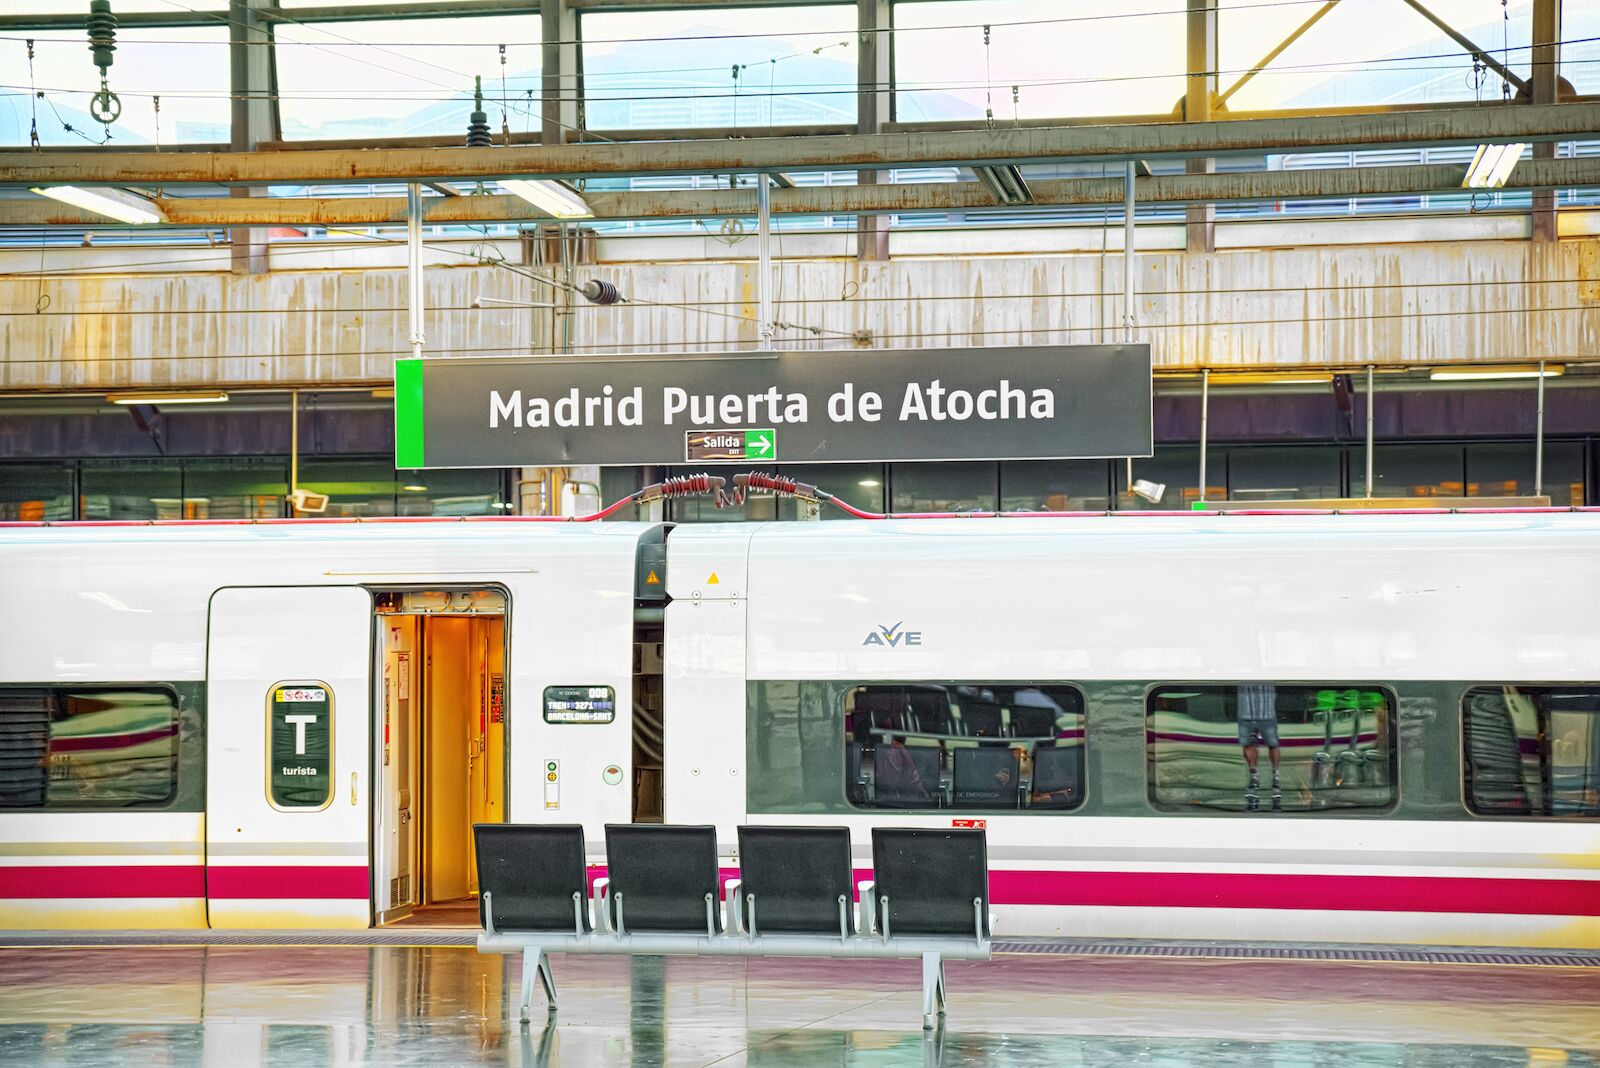 AVE train in the Madrid Puerta de Atocha train station in Madrid. AVE trains run between Madrid and Barcelona multiple times daily.